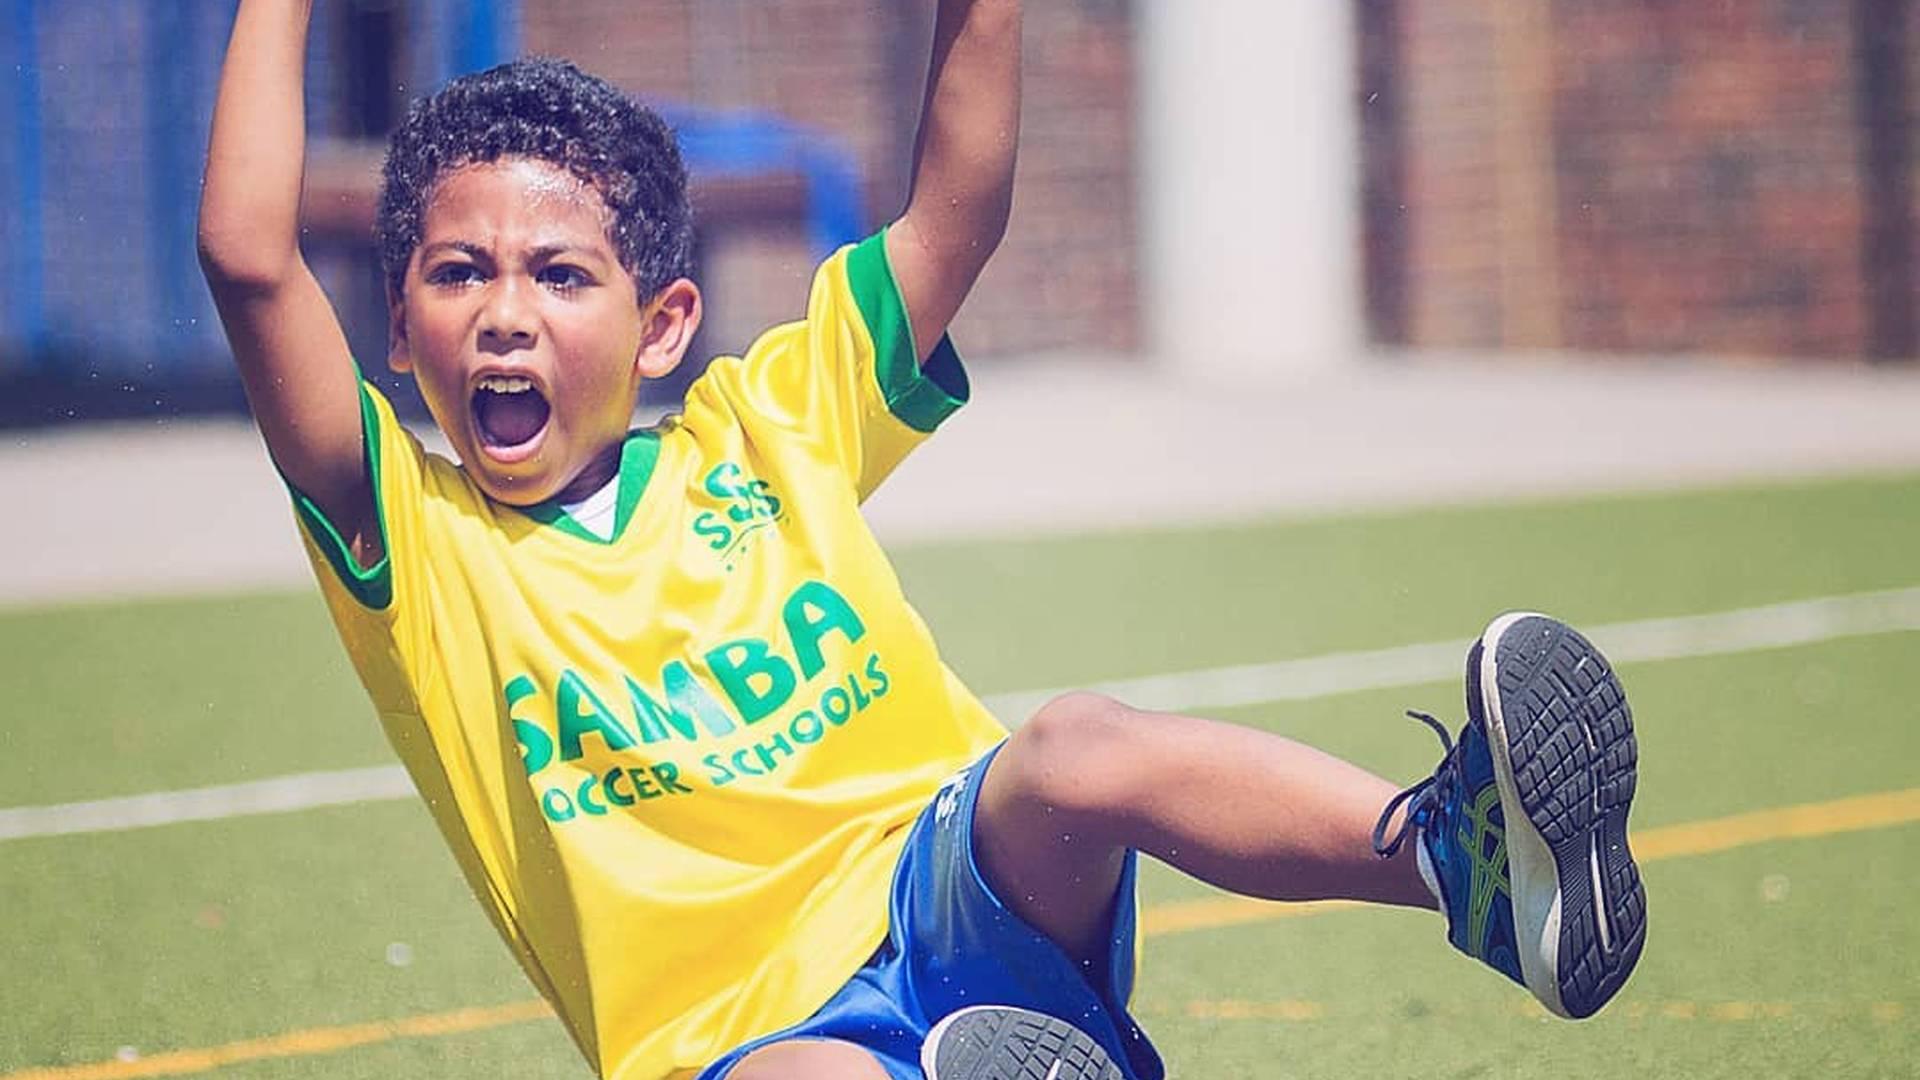 [Wembley SUN] Football Classes for Kids aged 4-12 photo